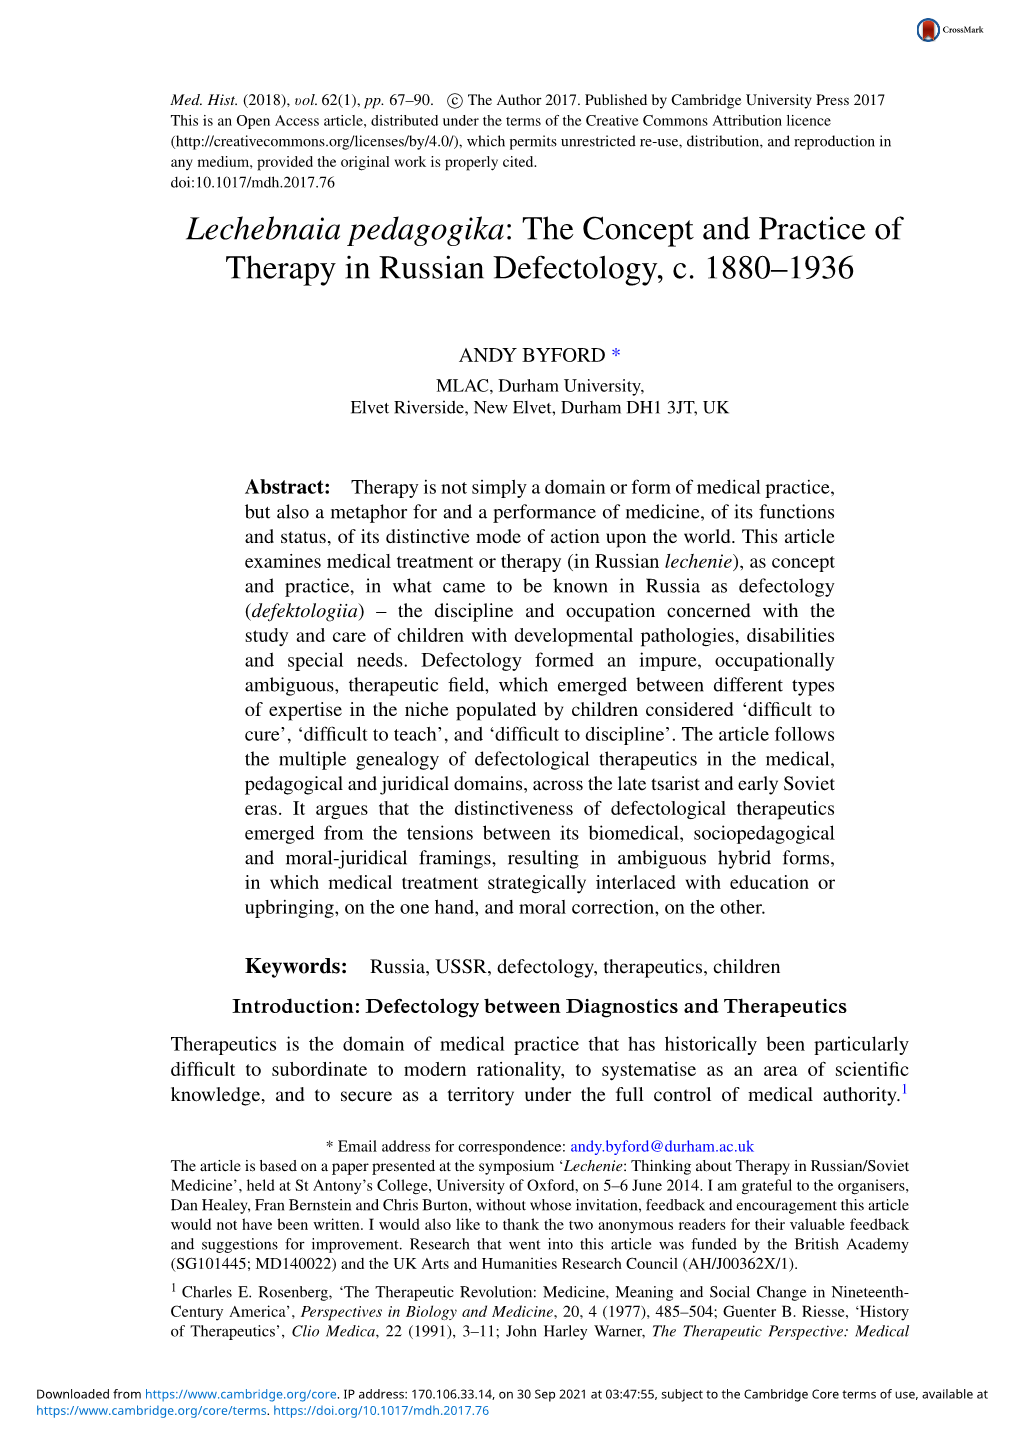 The Concept and Practice of Therapy in Russian Defectology, C. 1880–1936